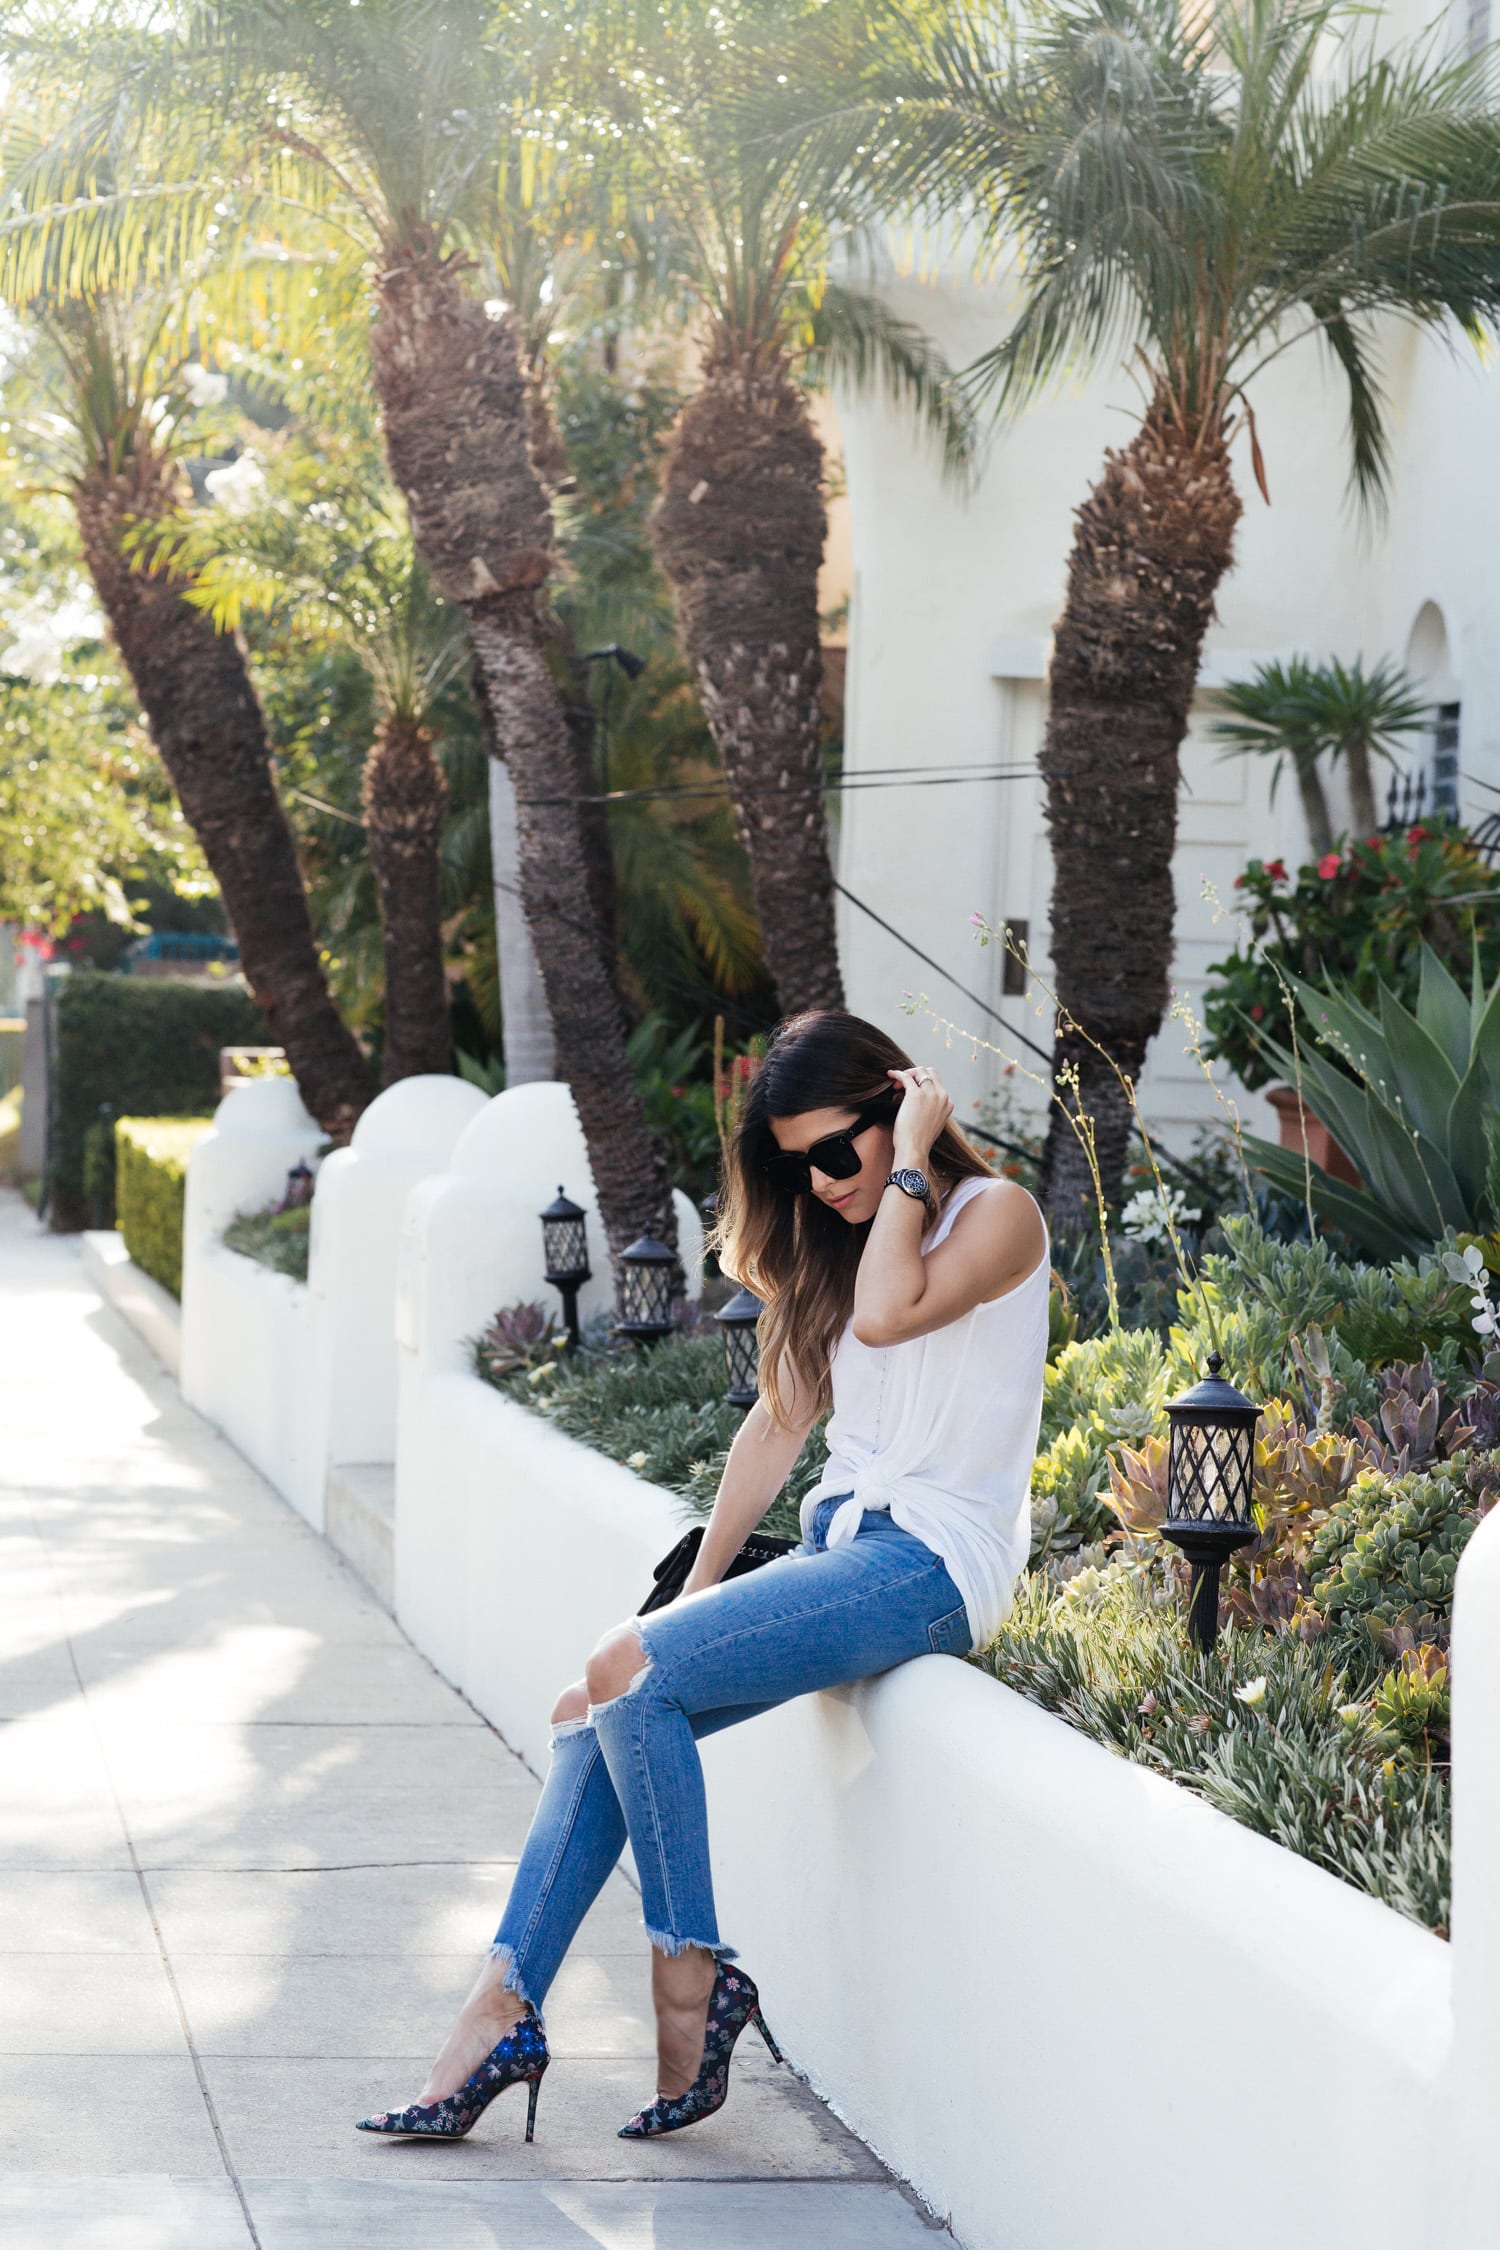 ripped jeans, white tank, floral pumps - Back to Basics | The Girl From Panama @pamhetlinger 